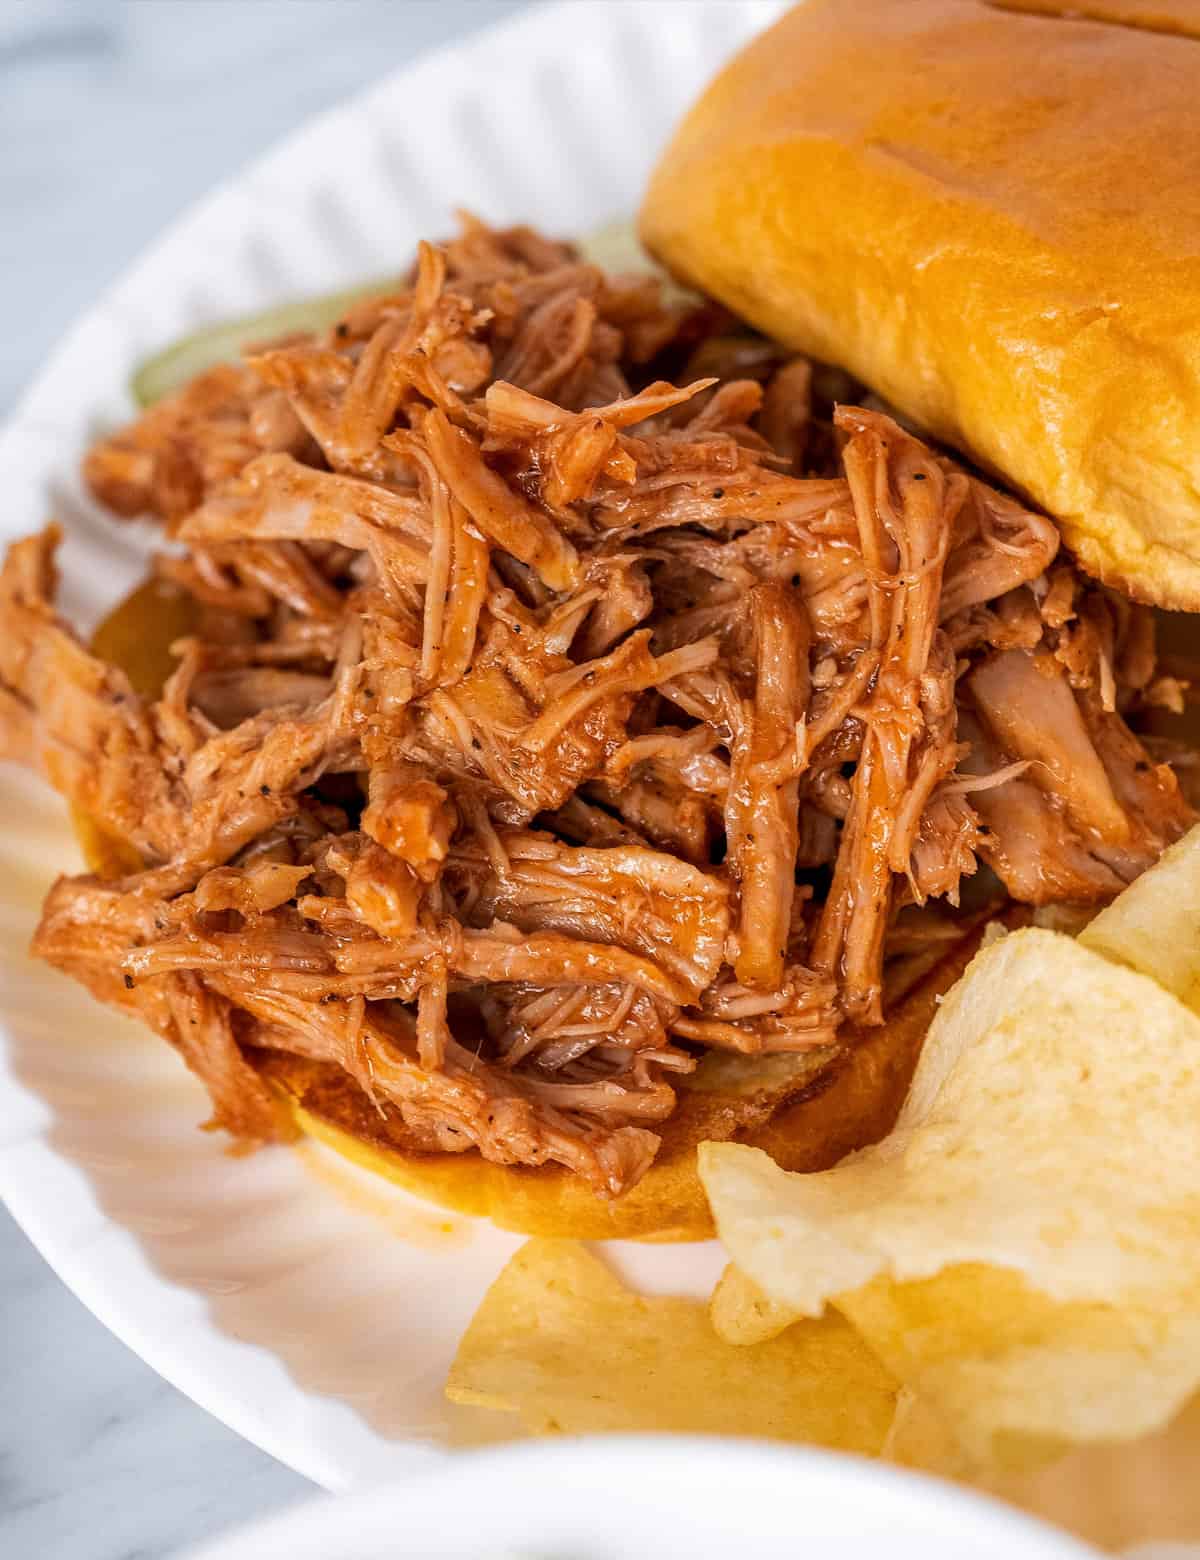 https://www.thechunkychef.com/wp-content/uploads/2023/04/Instant-Pot-Pulled-Pork-feat.jpg